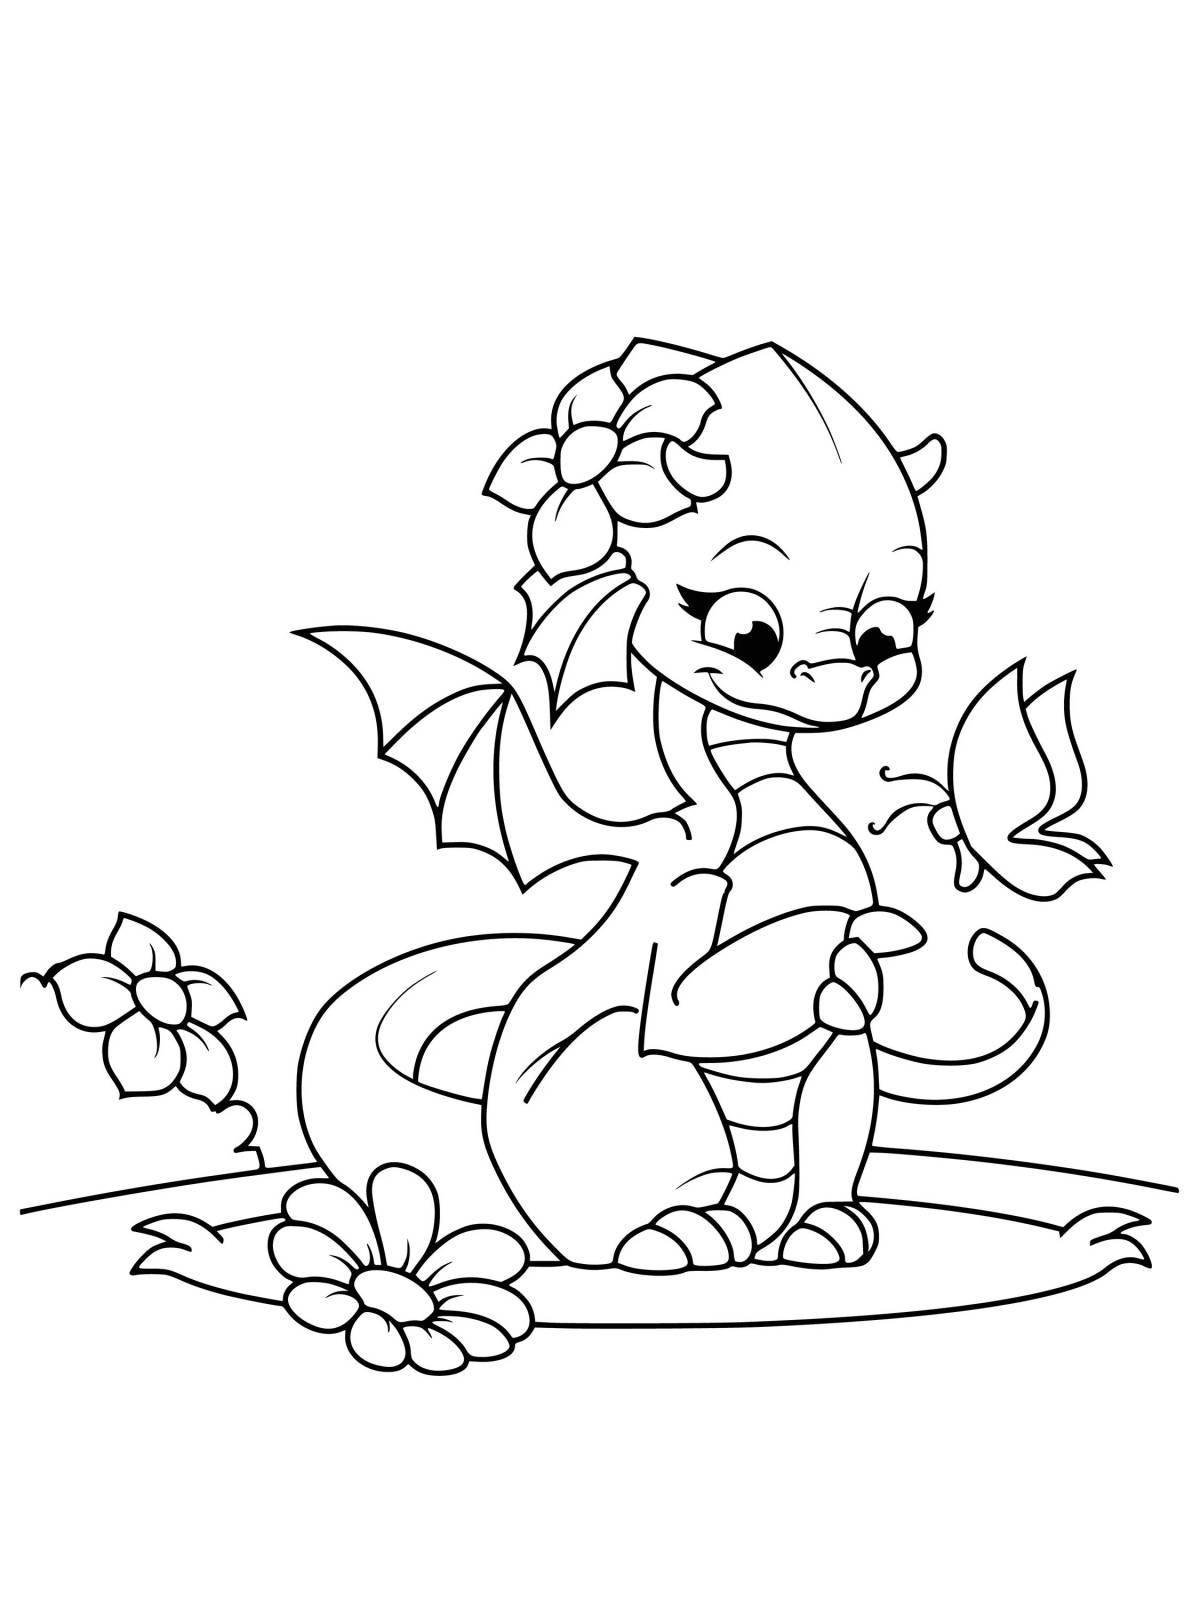 Dramatic coloring dragons for children 6-7 years old